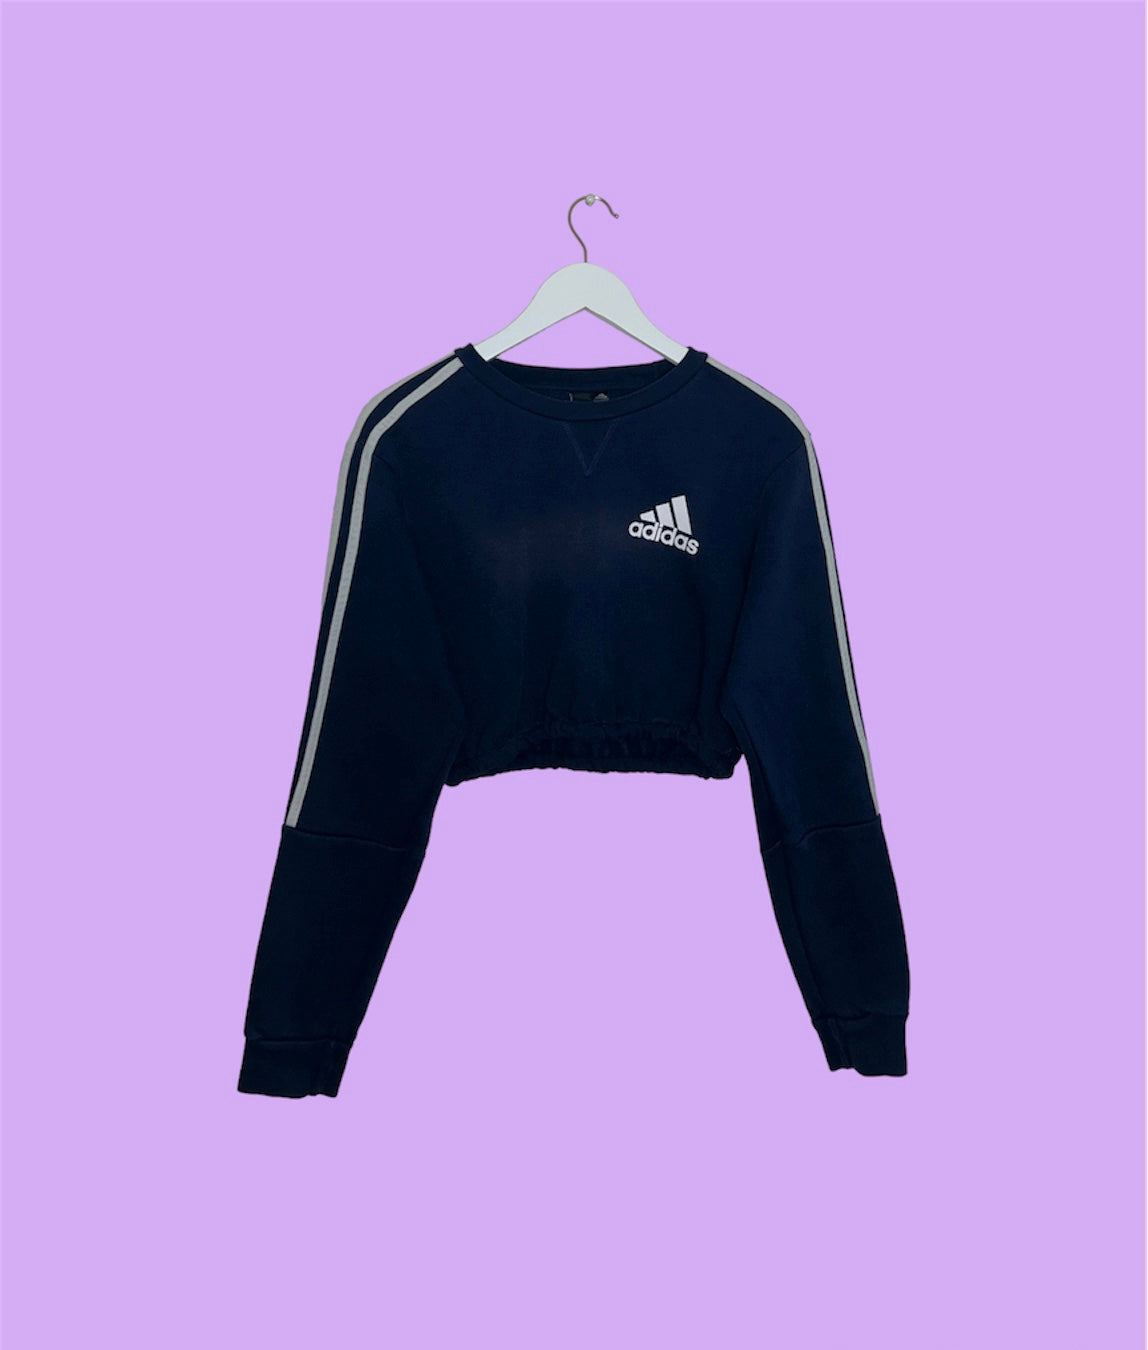 navy cropped sweatshirt with white adidas logo shown on a lilac background